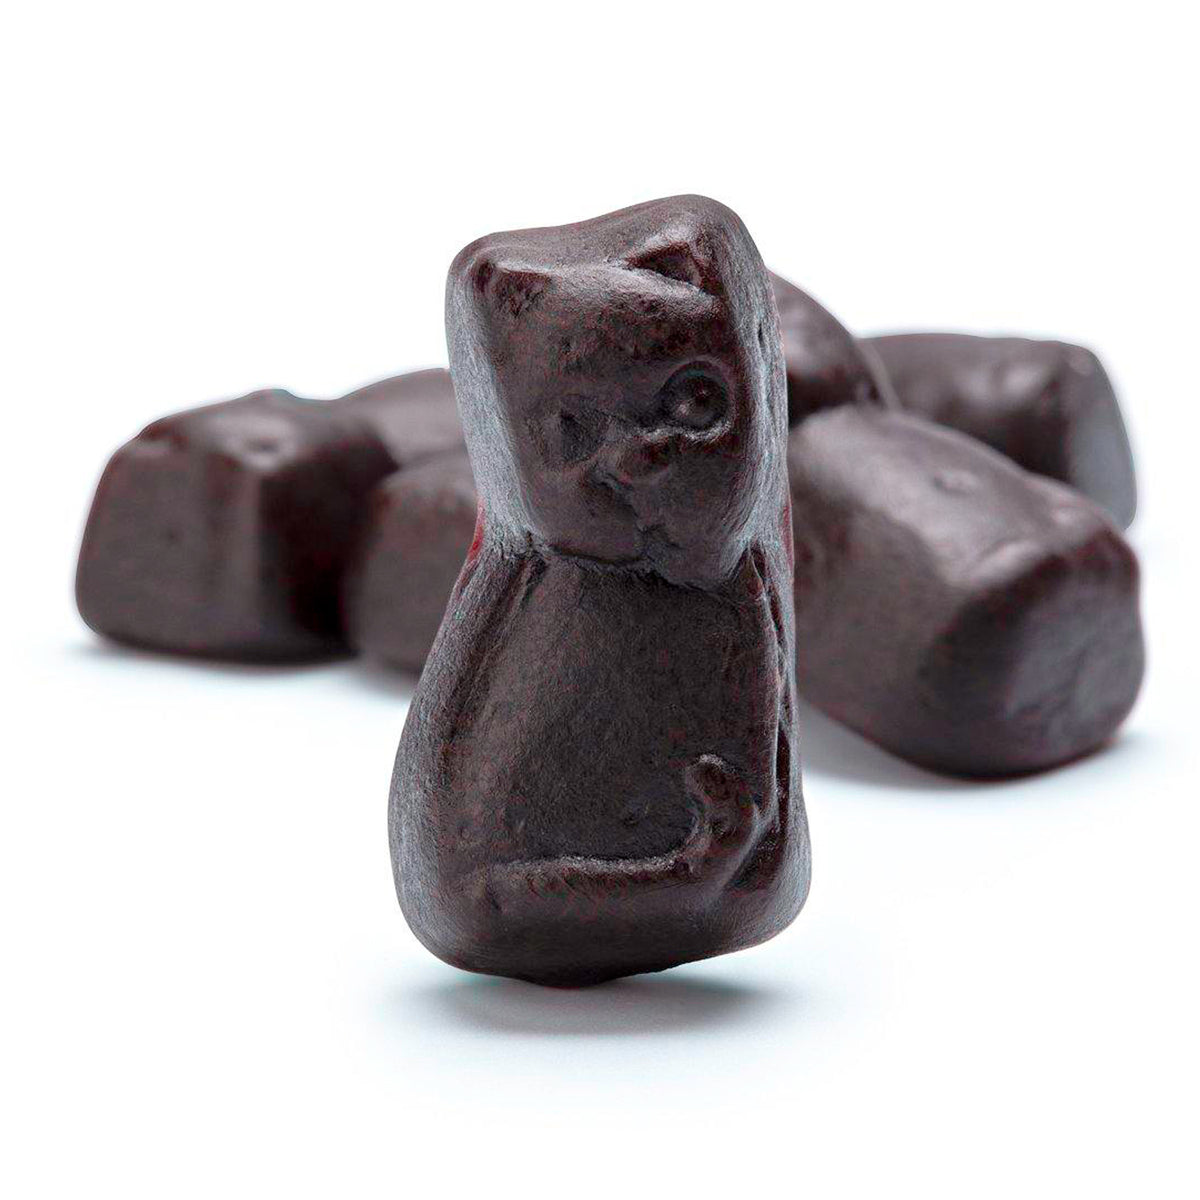 One bite of this delectable licorice and you’ll be hooked.